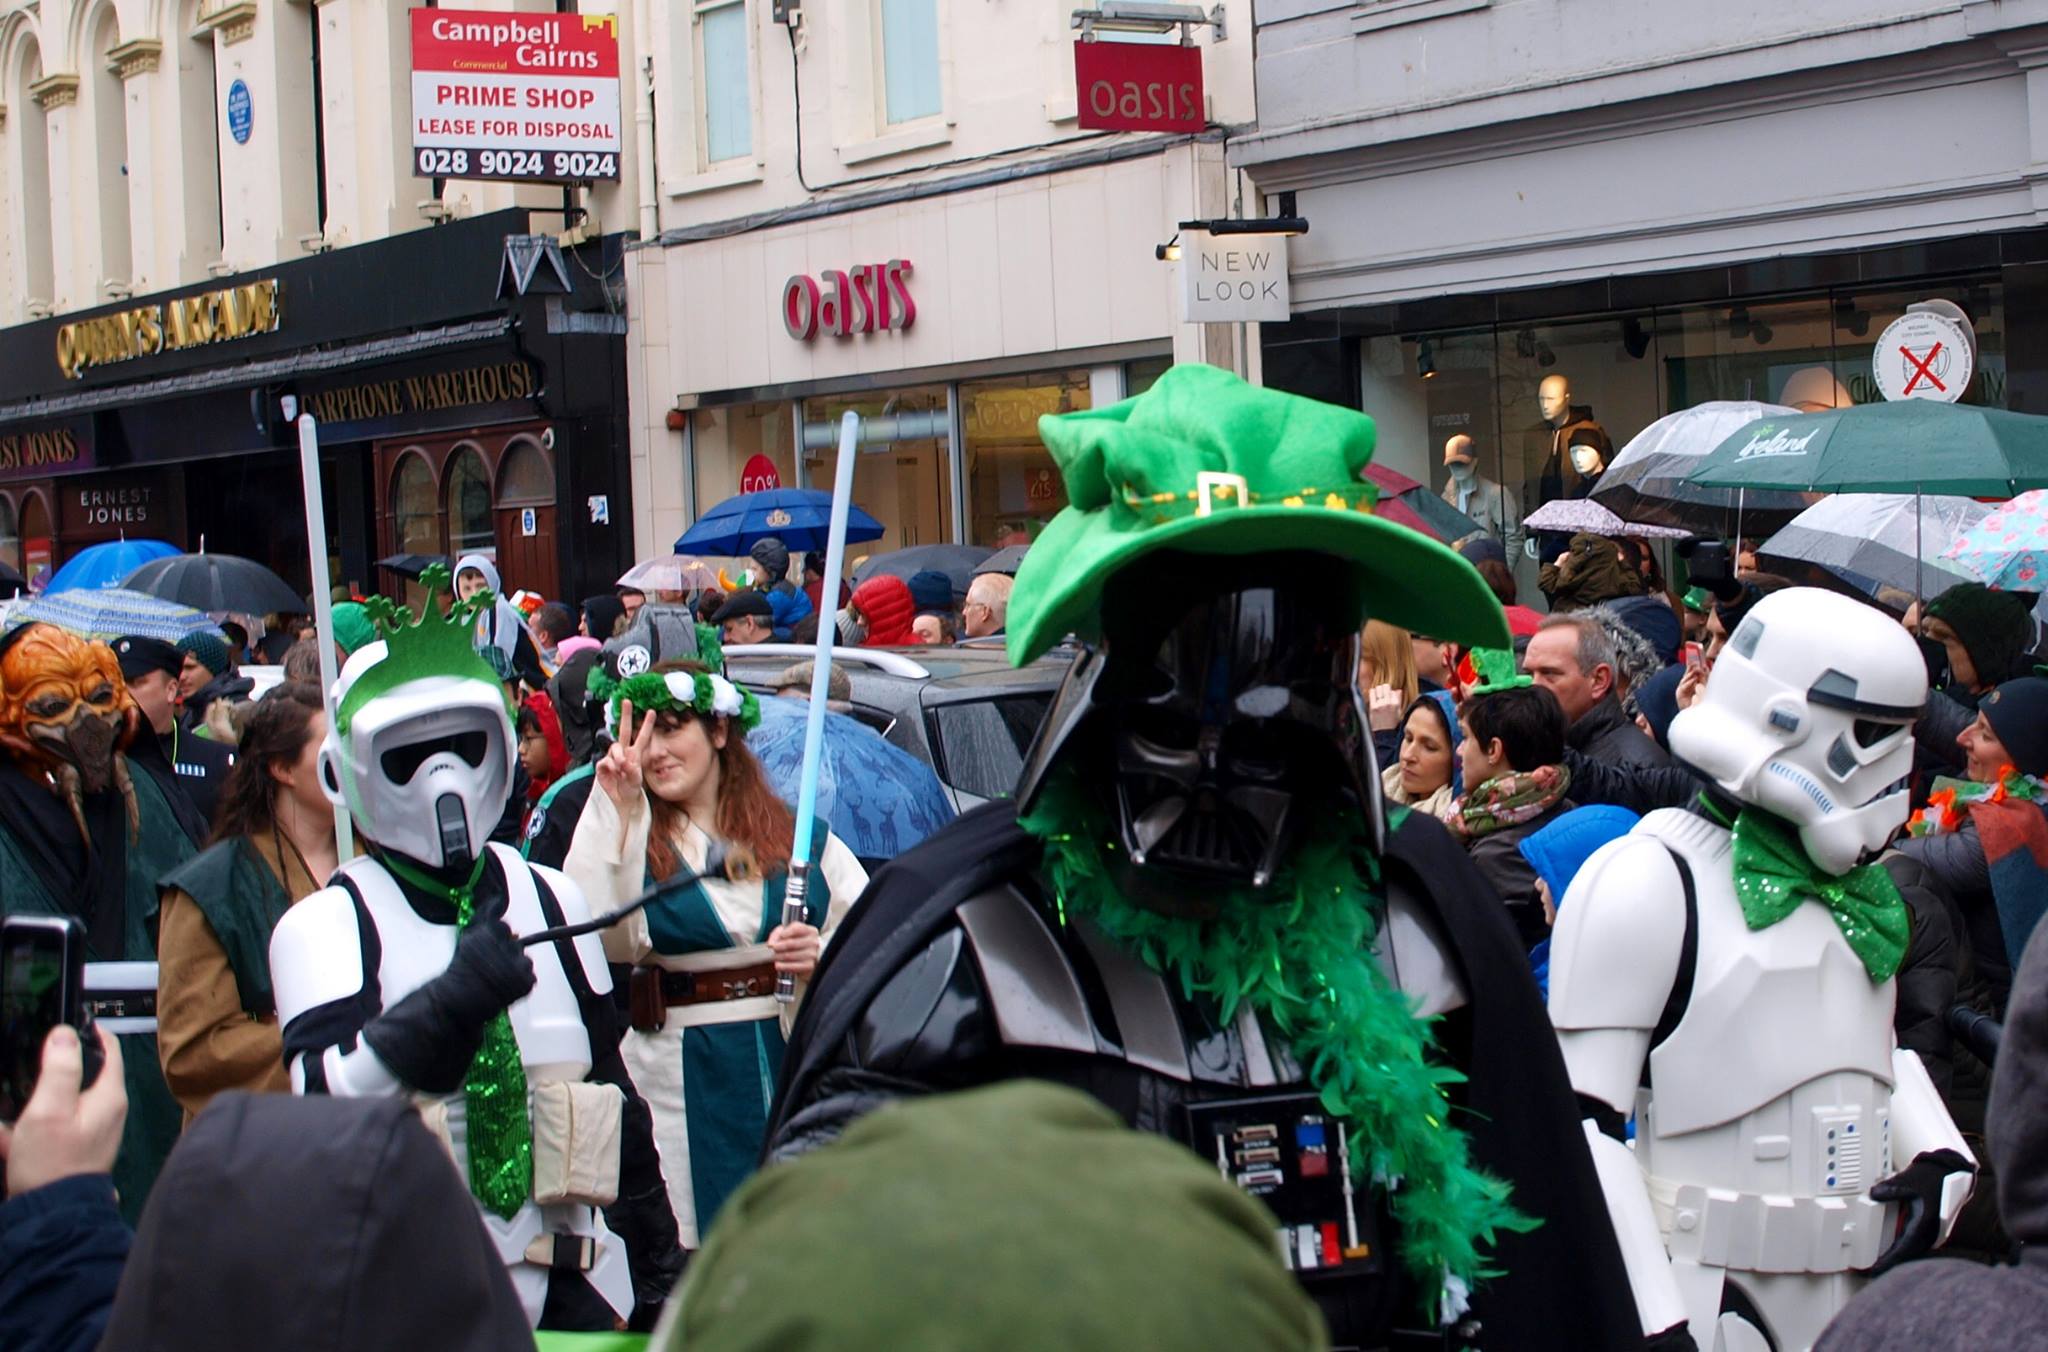 Darth Vader on a green hat and feather boa because why not?